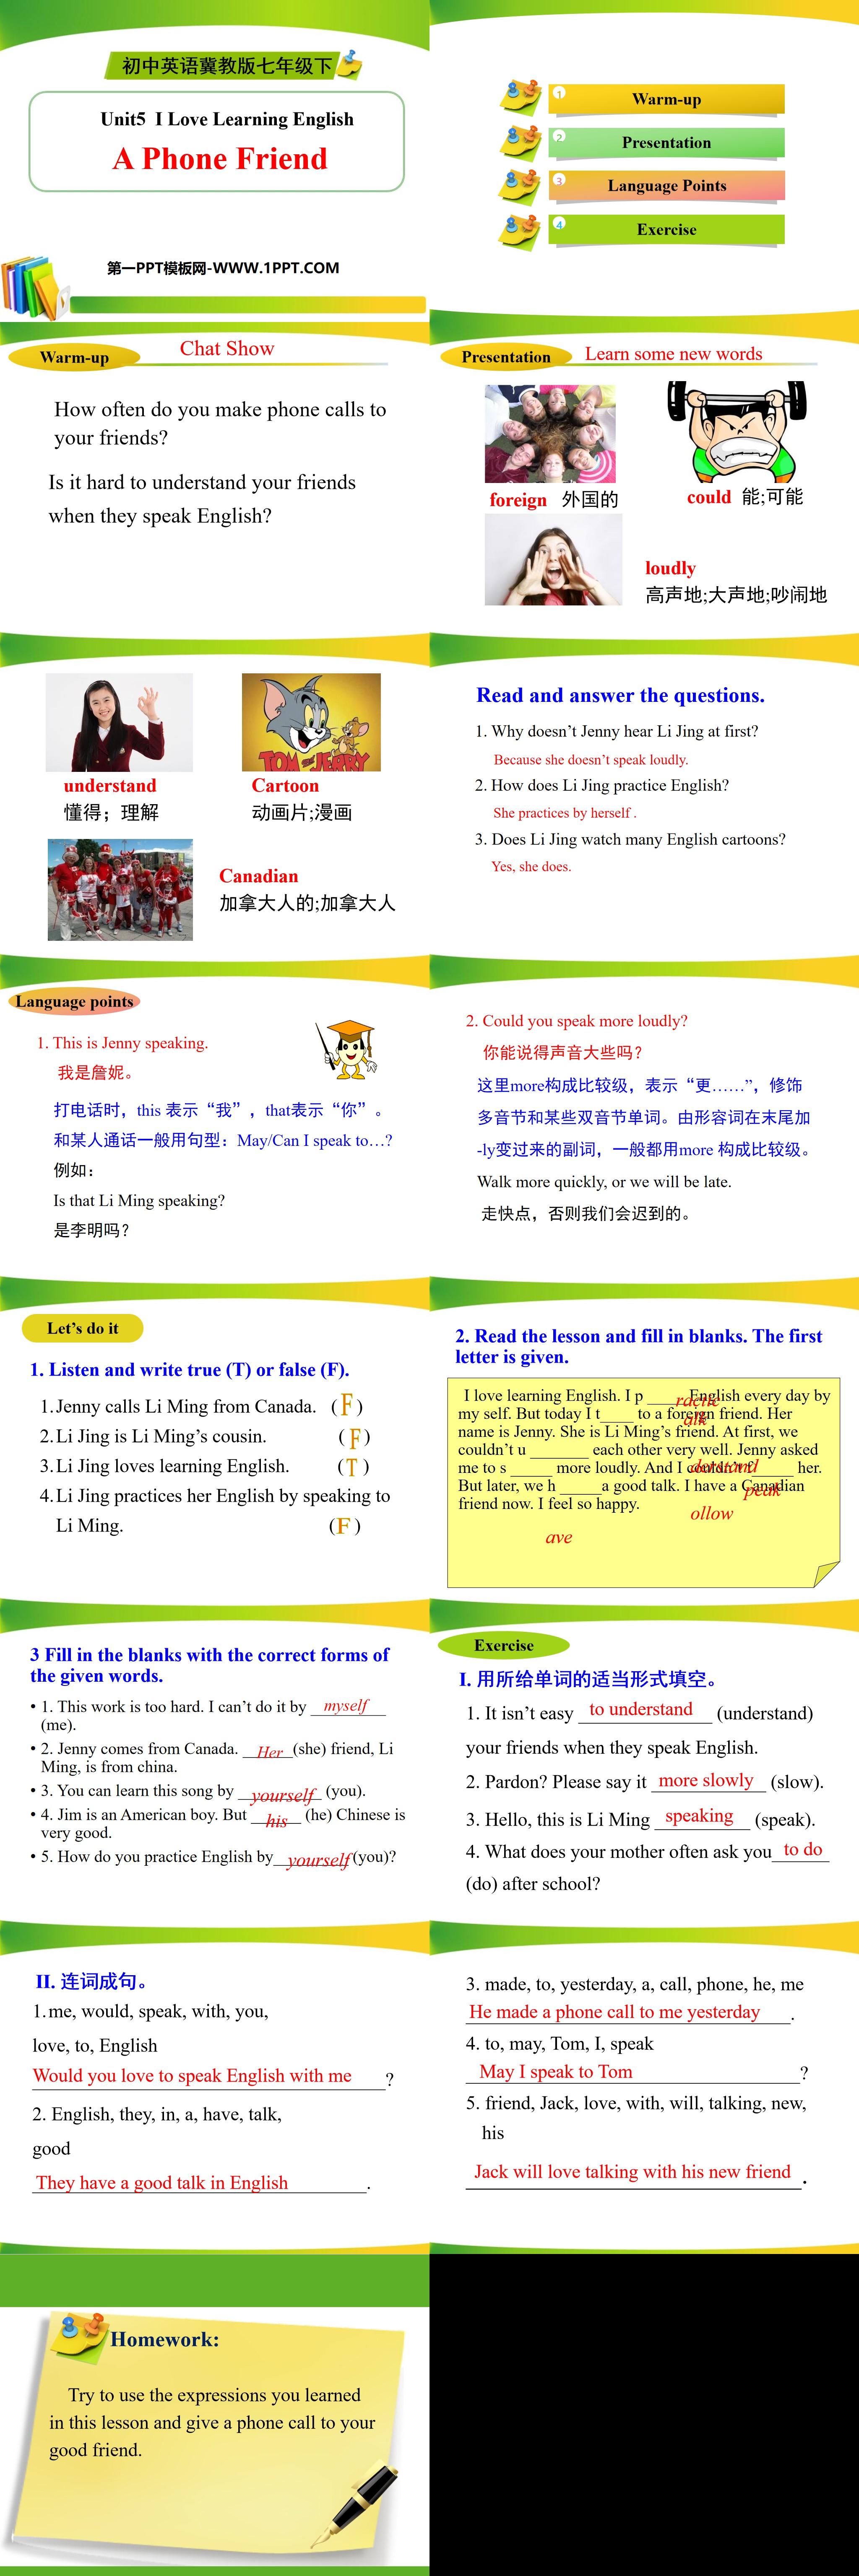 《A Phone Friend》I Love Learning English PPT课件
（2）